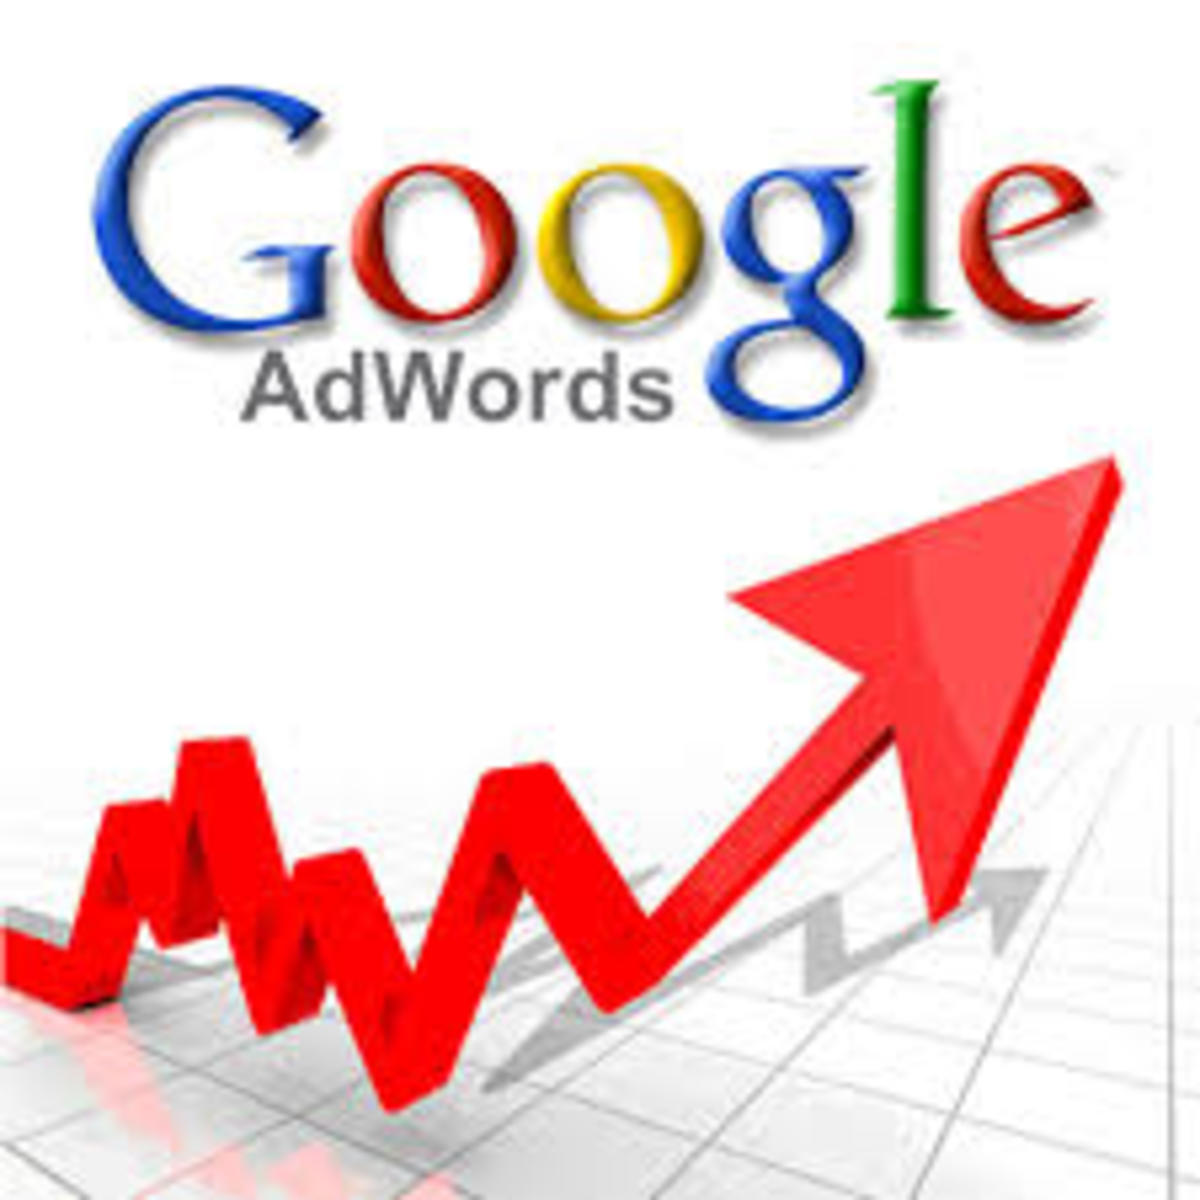 How to Increase Sales Using Google Ads?